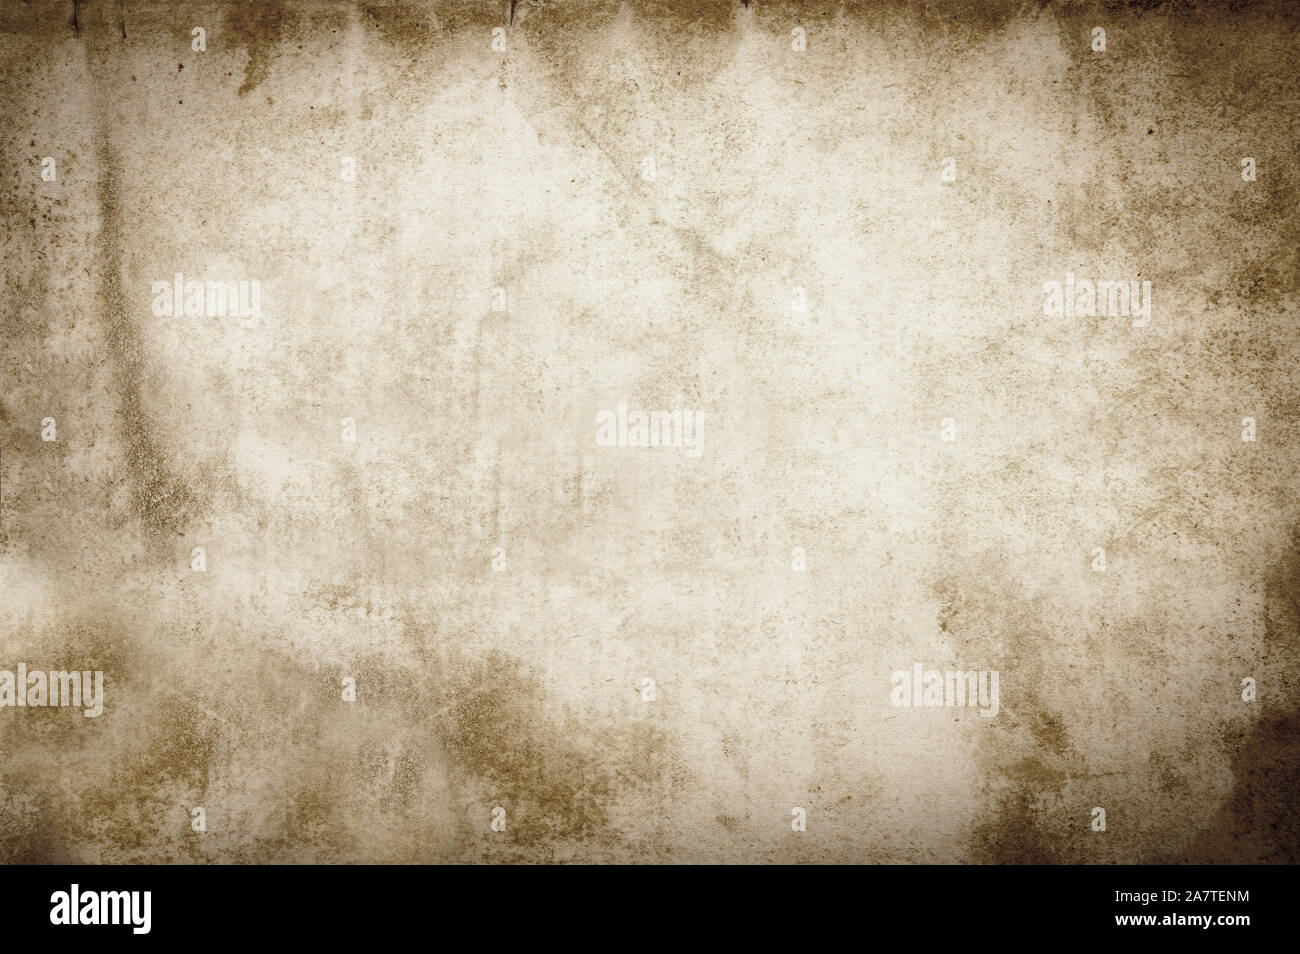 Dirty old paper vignetting  background Stock Photo